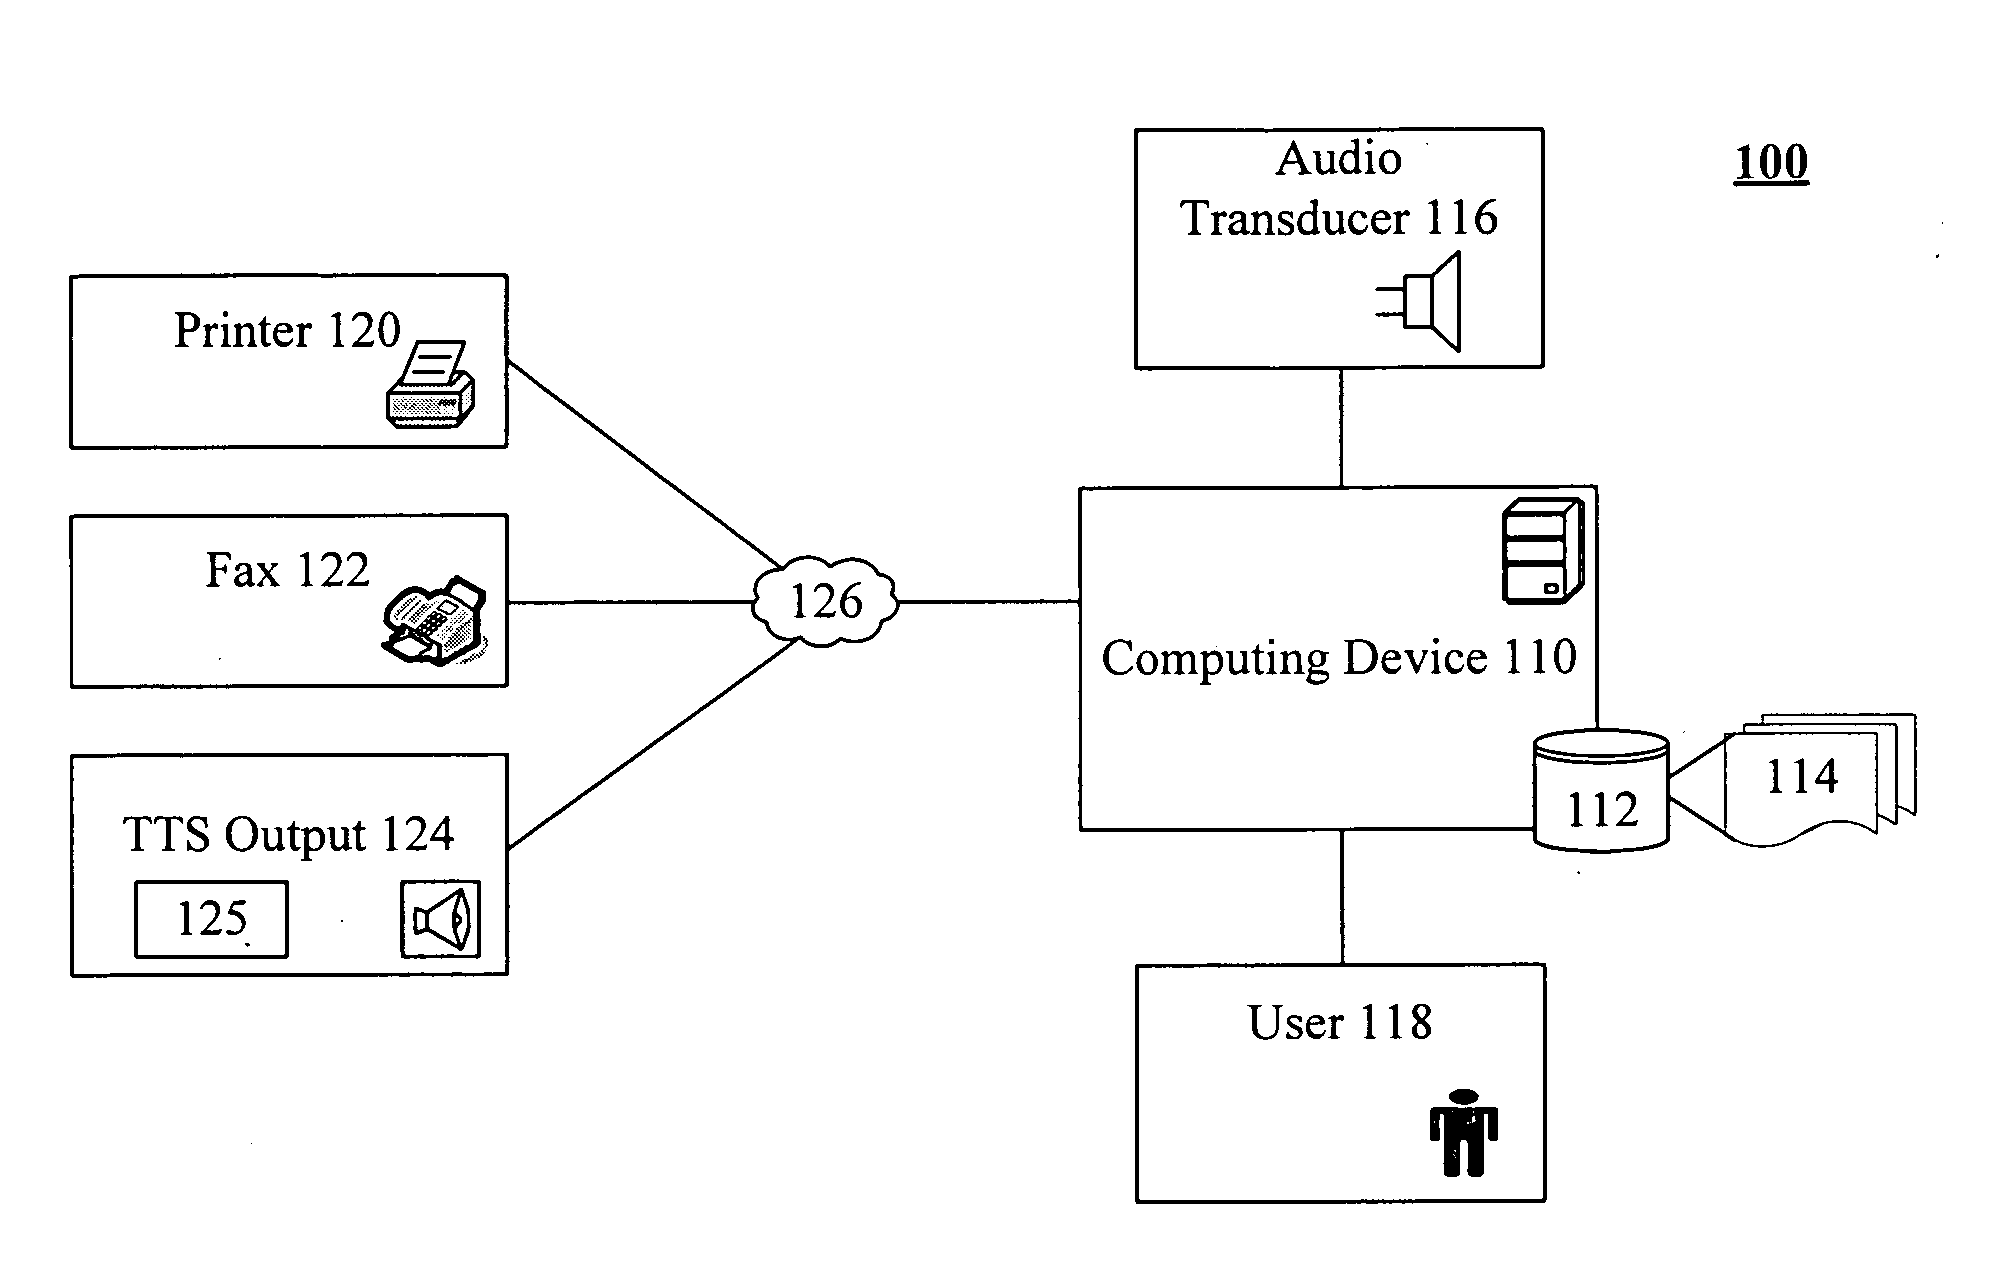 Printing to a text-to-speech output device